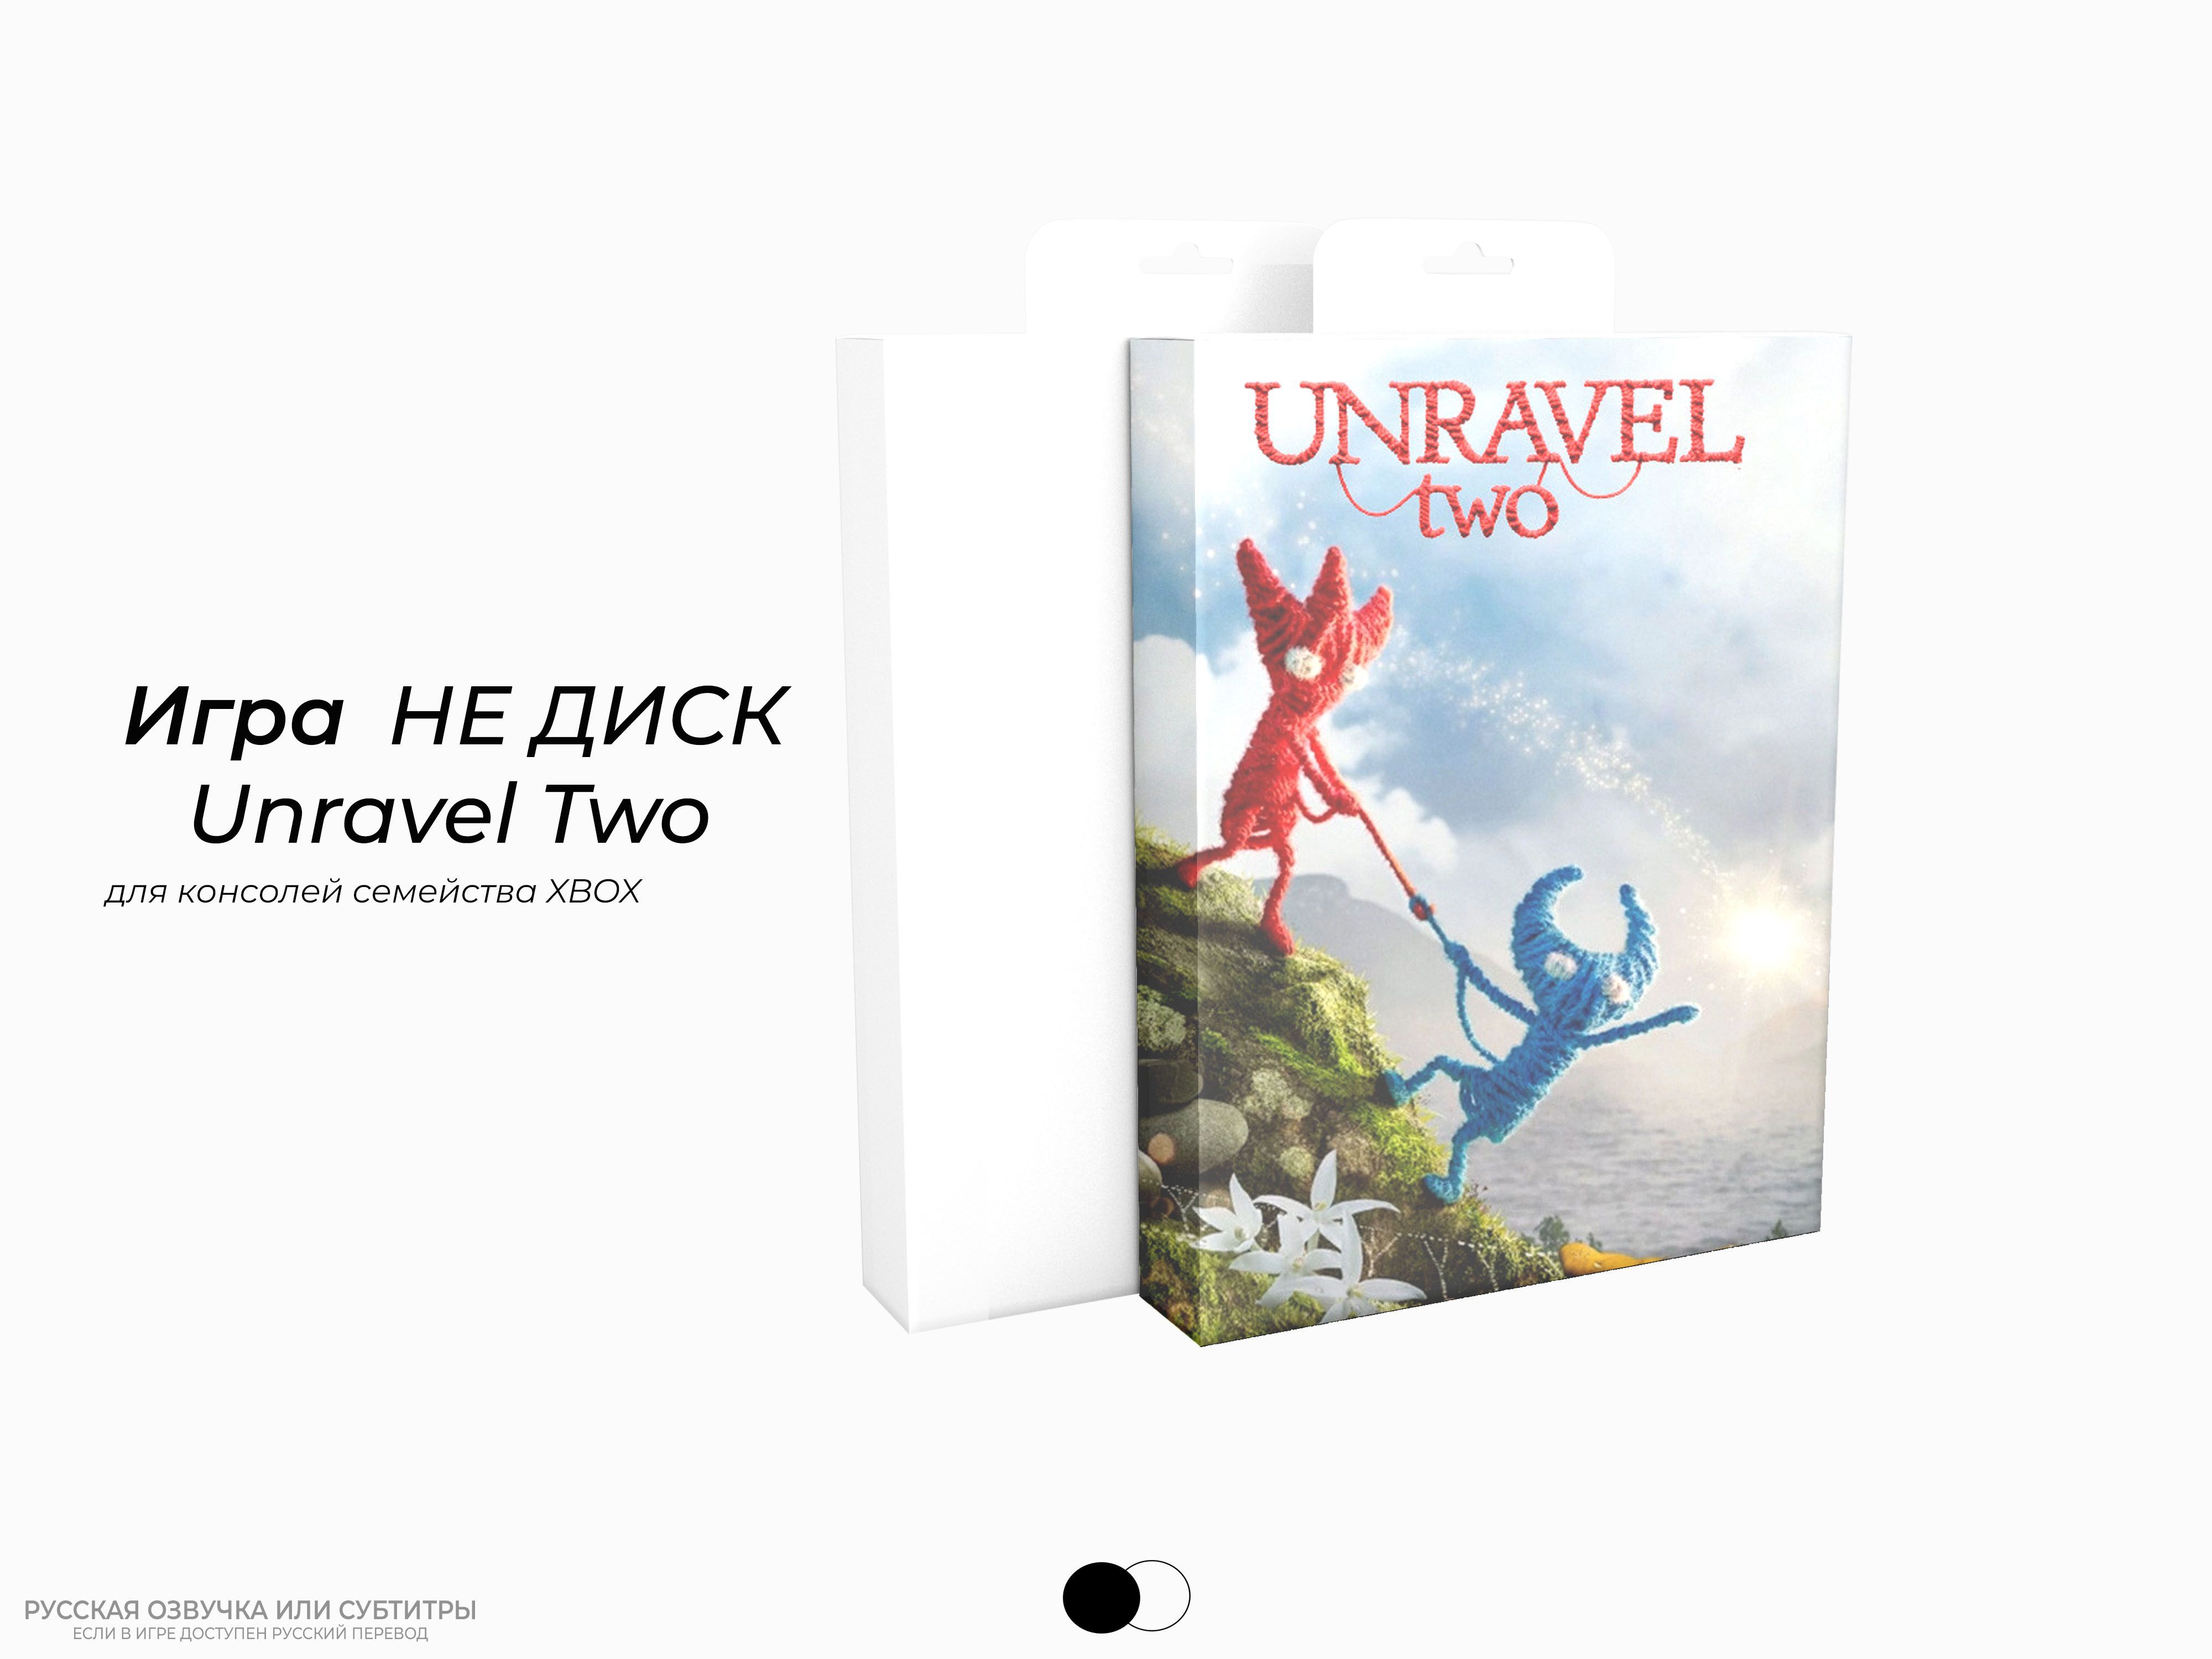 Unravel two русский язык. Unravel two Xbox one. Unravel игра.